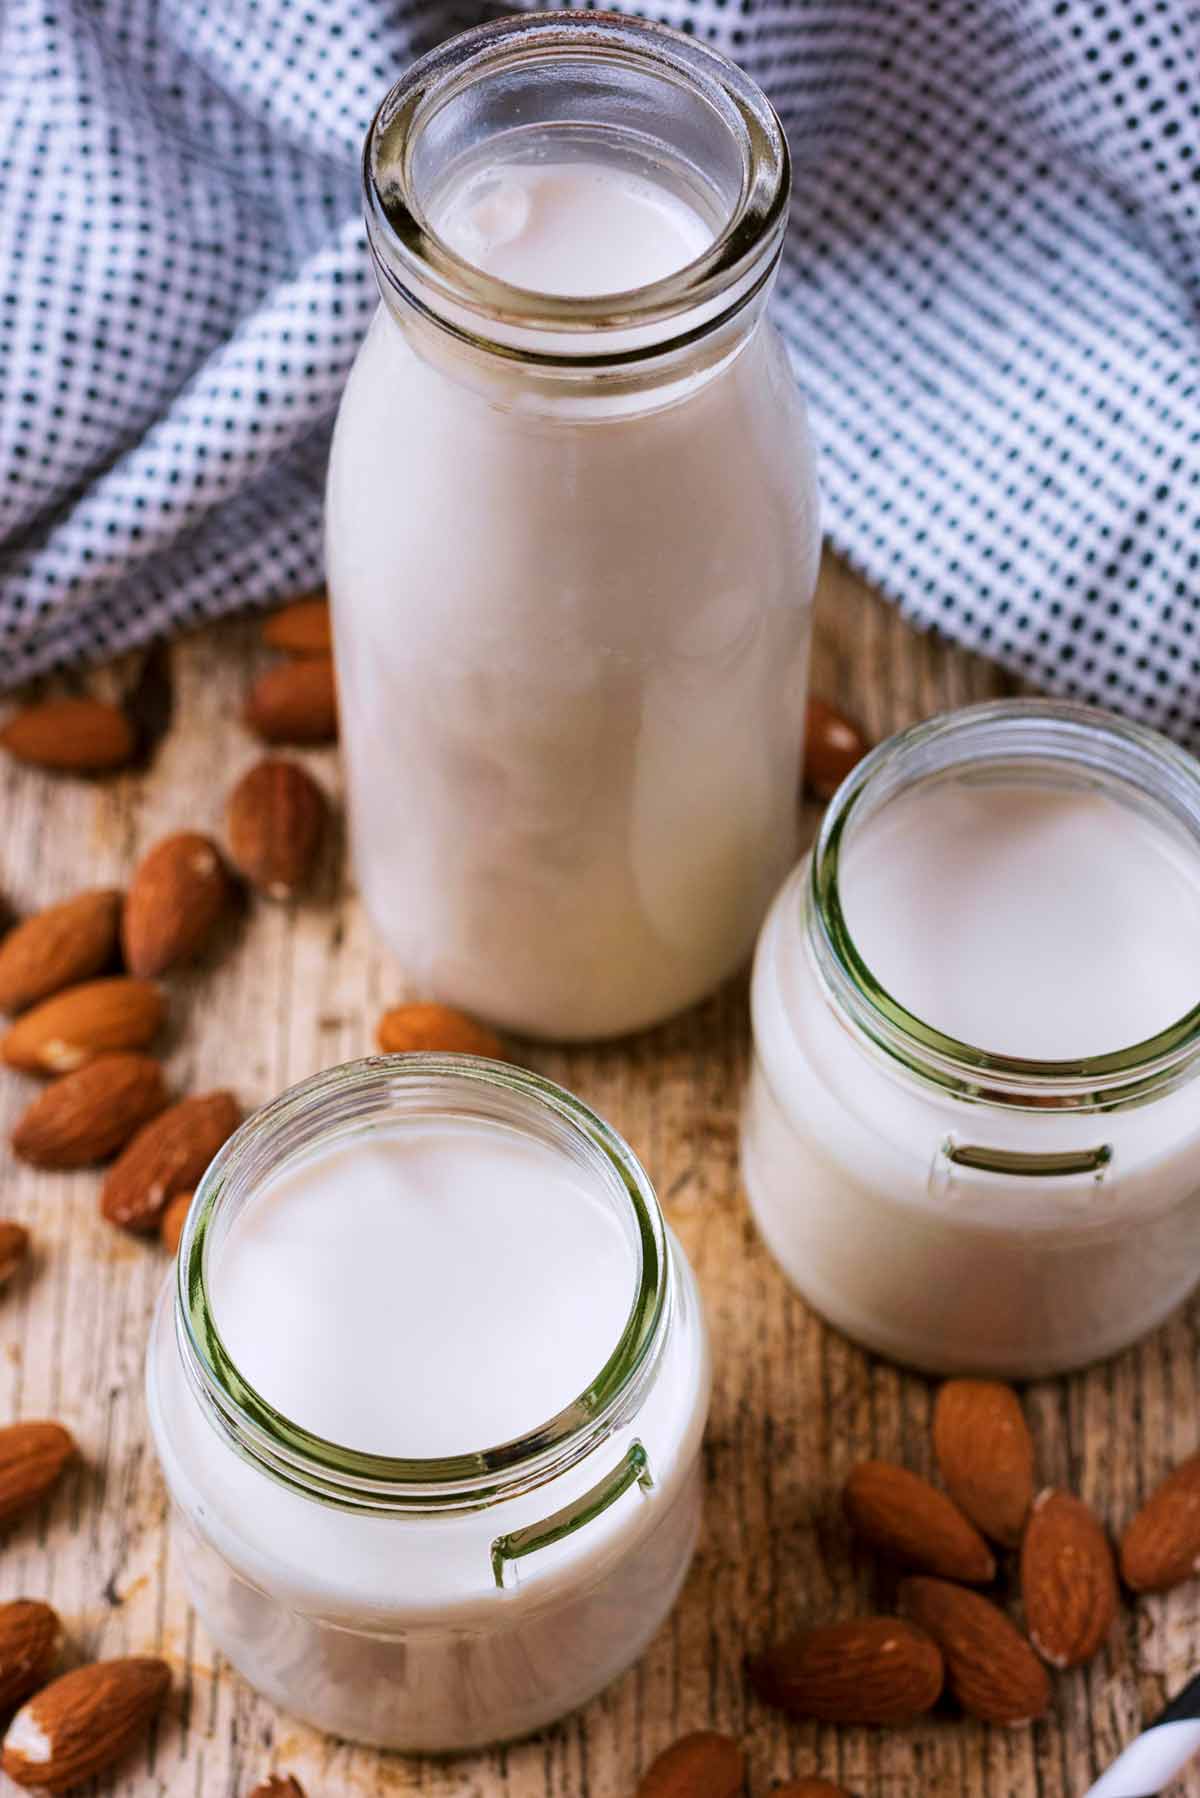 Jars of almond milk next to a black and white spotted towel.